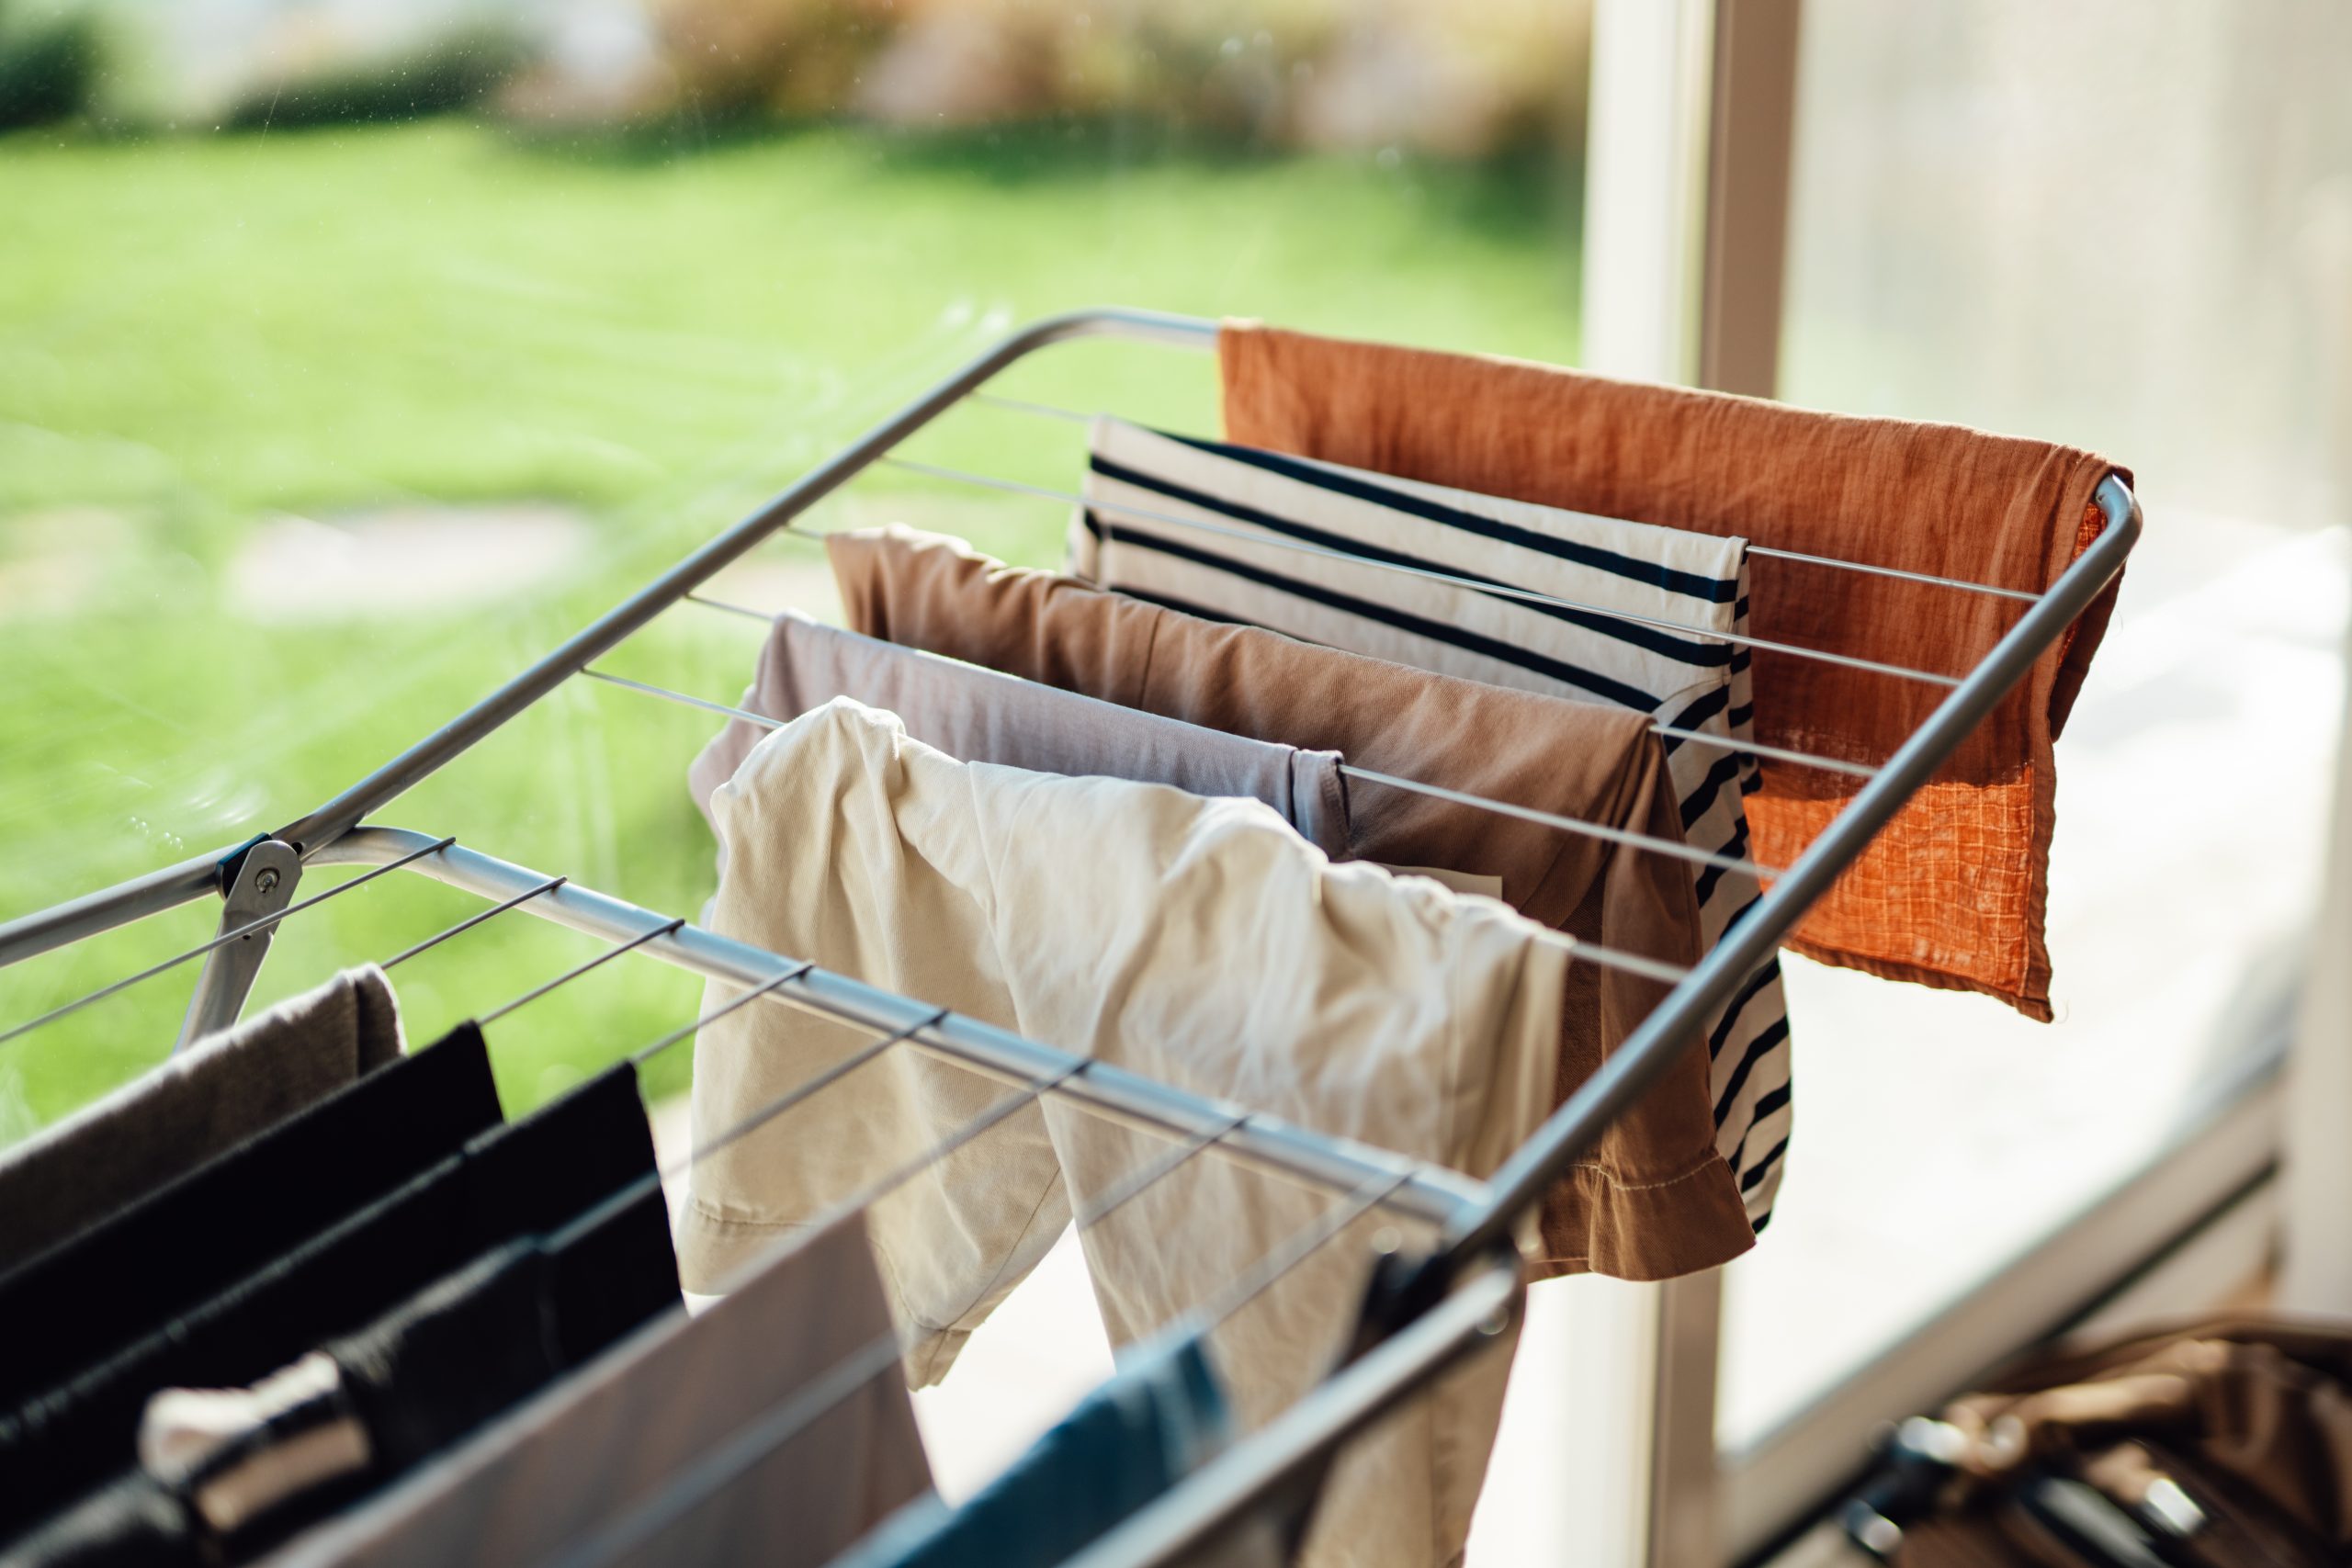 Savvy mum shares simple hack to dry clothes quicker – some hail it ‘genius’ but others think it’s a ‘recipe for mould’